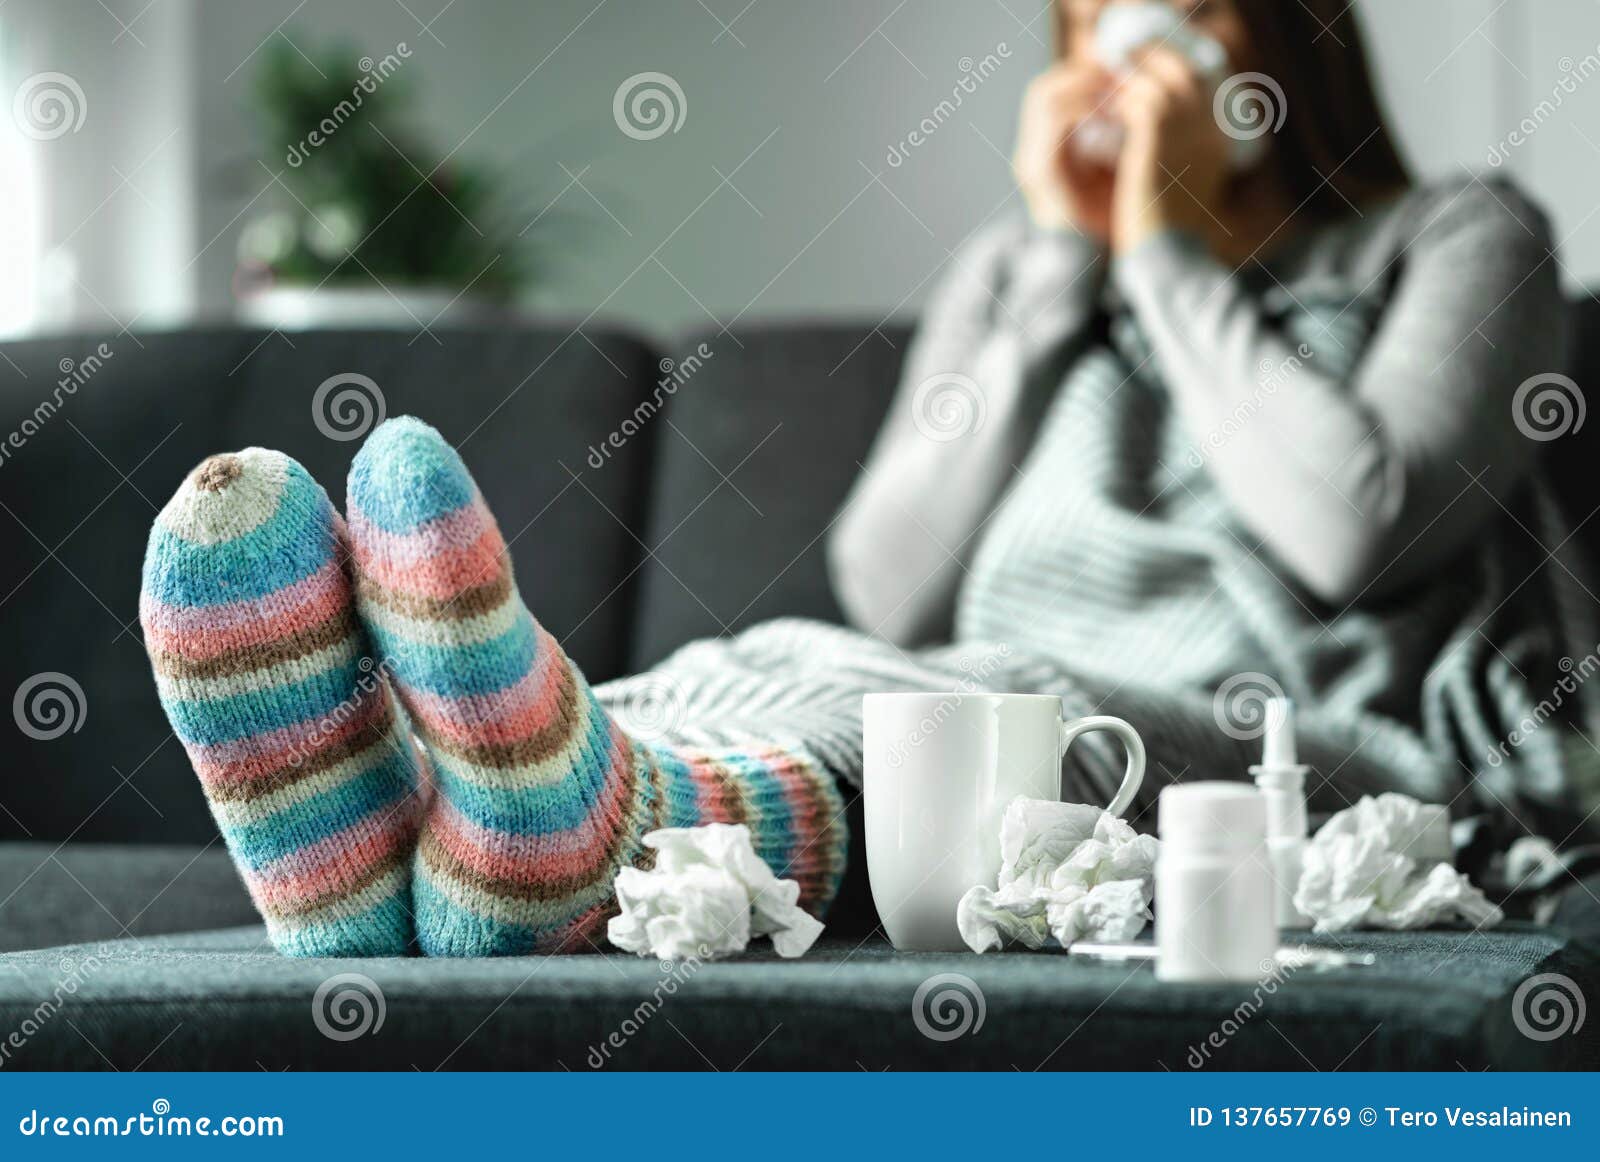 sick woman with flu, cold, fever and cough sitting on couch at home. ill person blowing nose and sneezing with tissue.